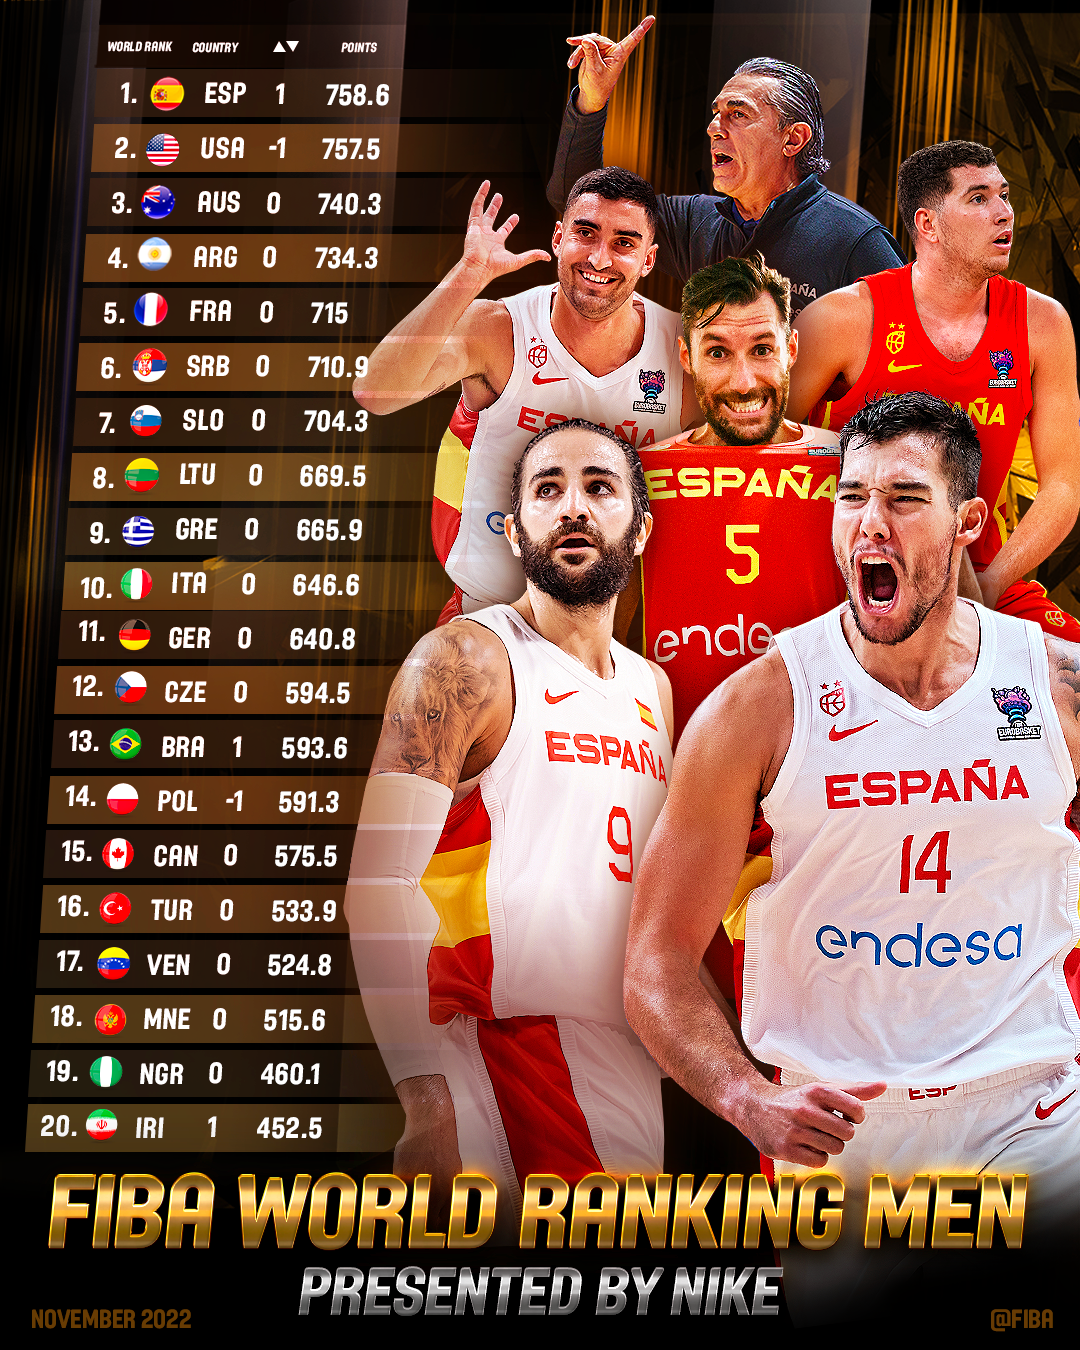 Aside from the US and Spain swapping positions, the top 10 of the men's world ranking remains unchanged ©fiba.basketball